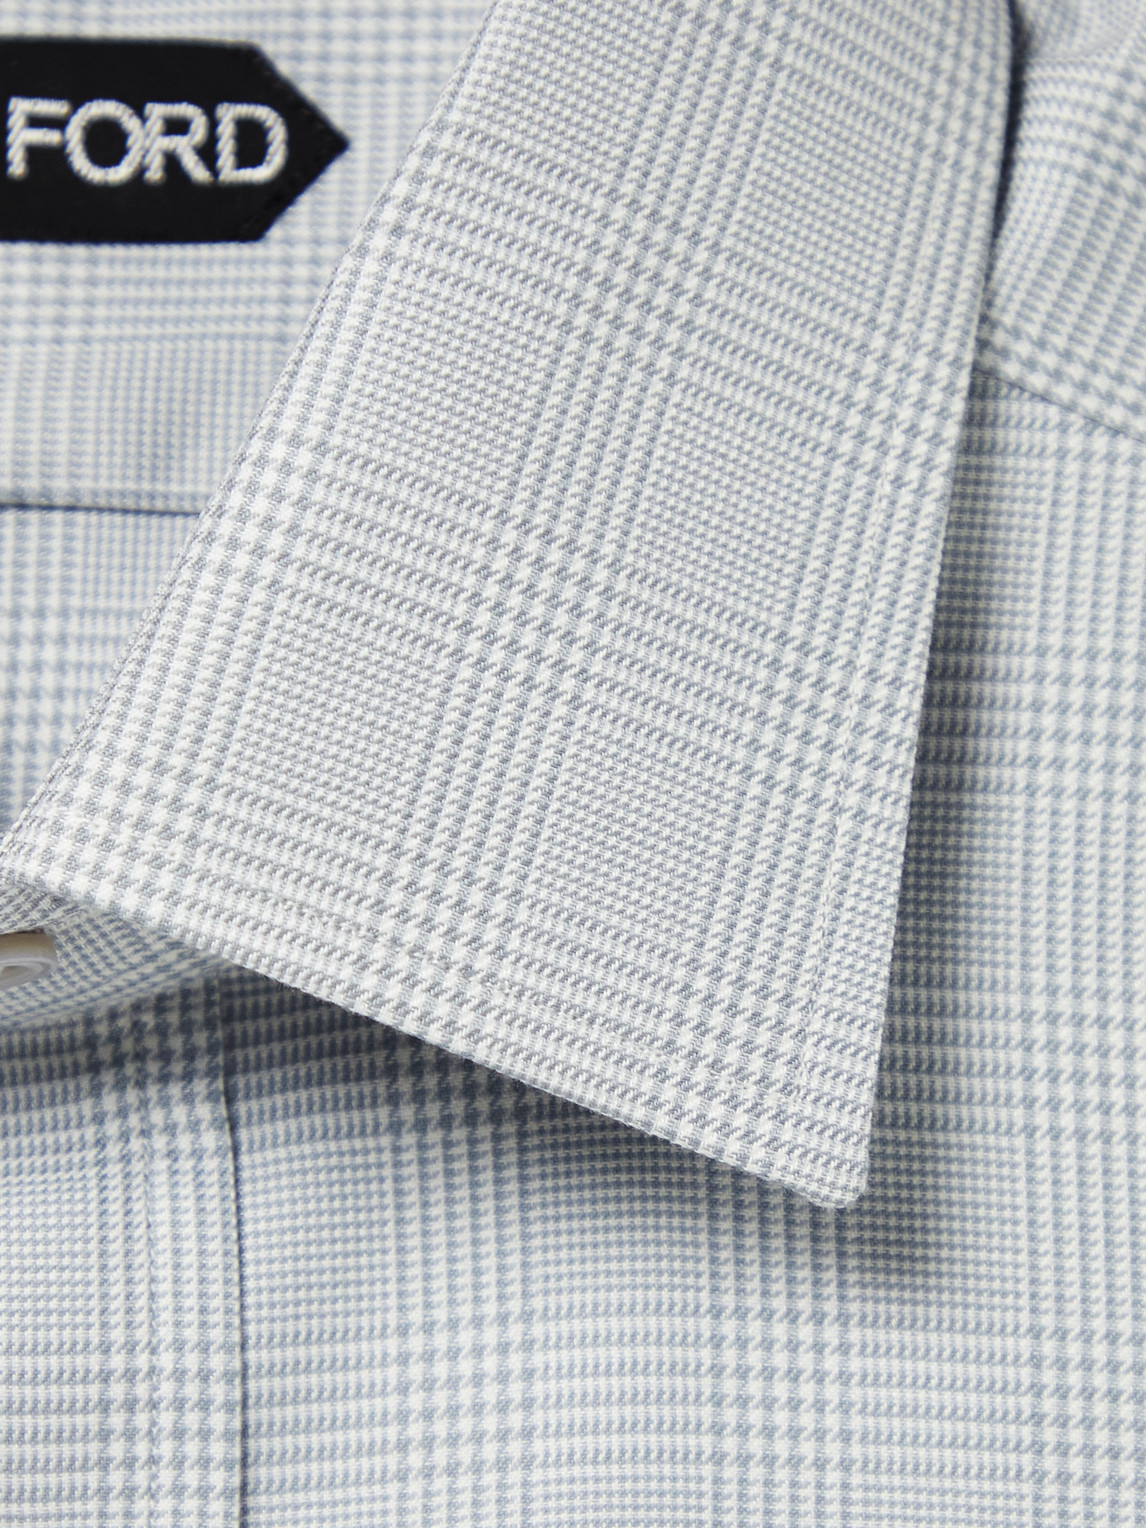 Tom Ford Grey Slim Fit Prince Of Wales Checked Cotton Shirt, $370, MR  PORTER